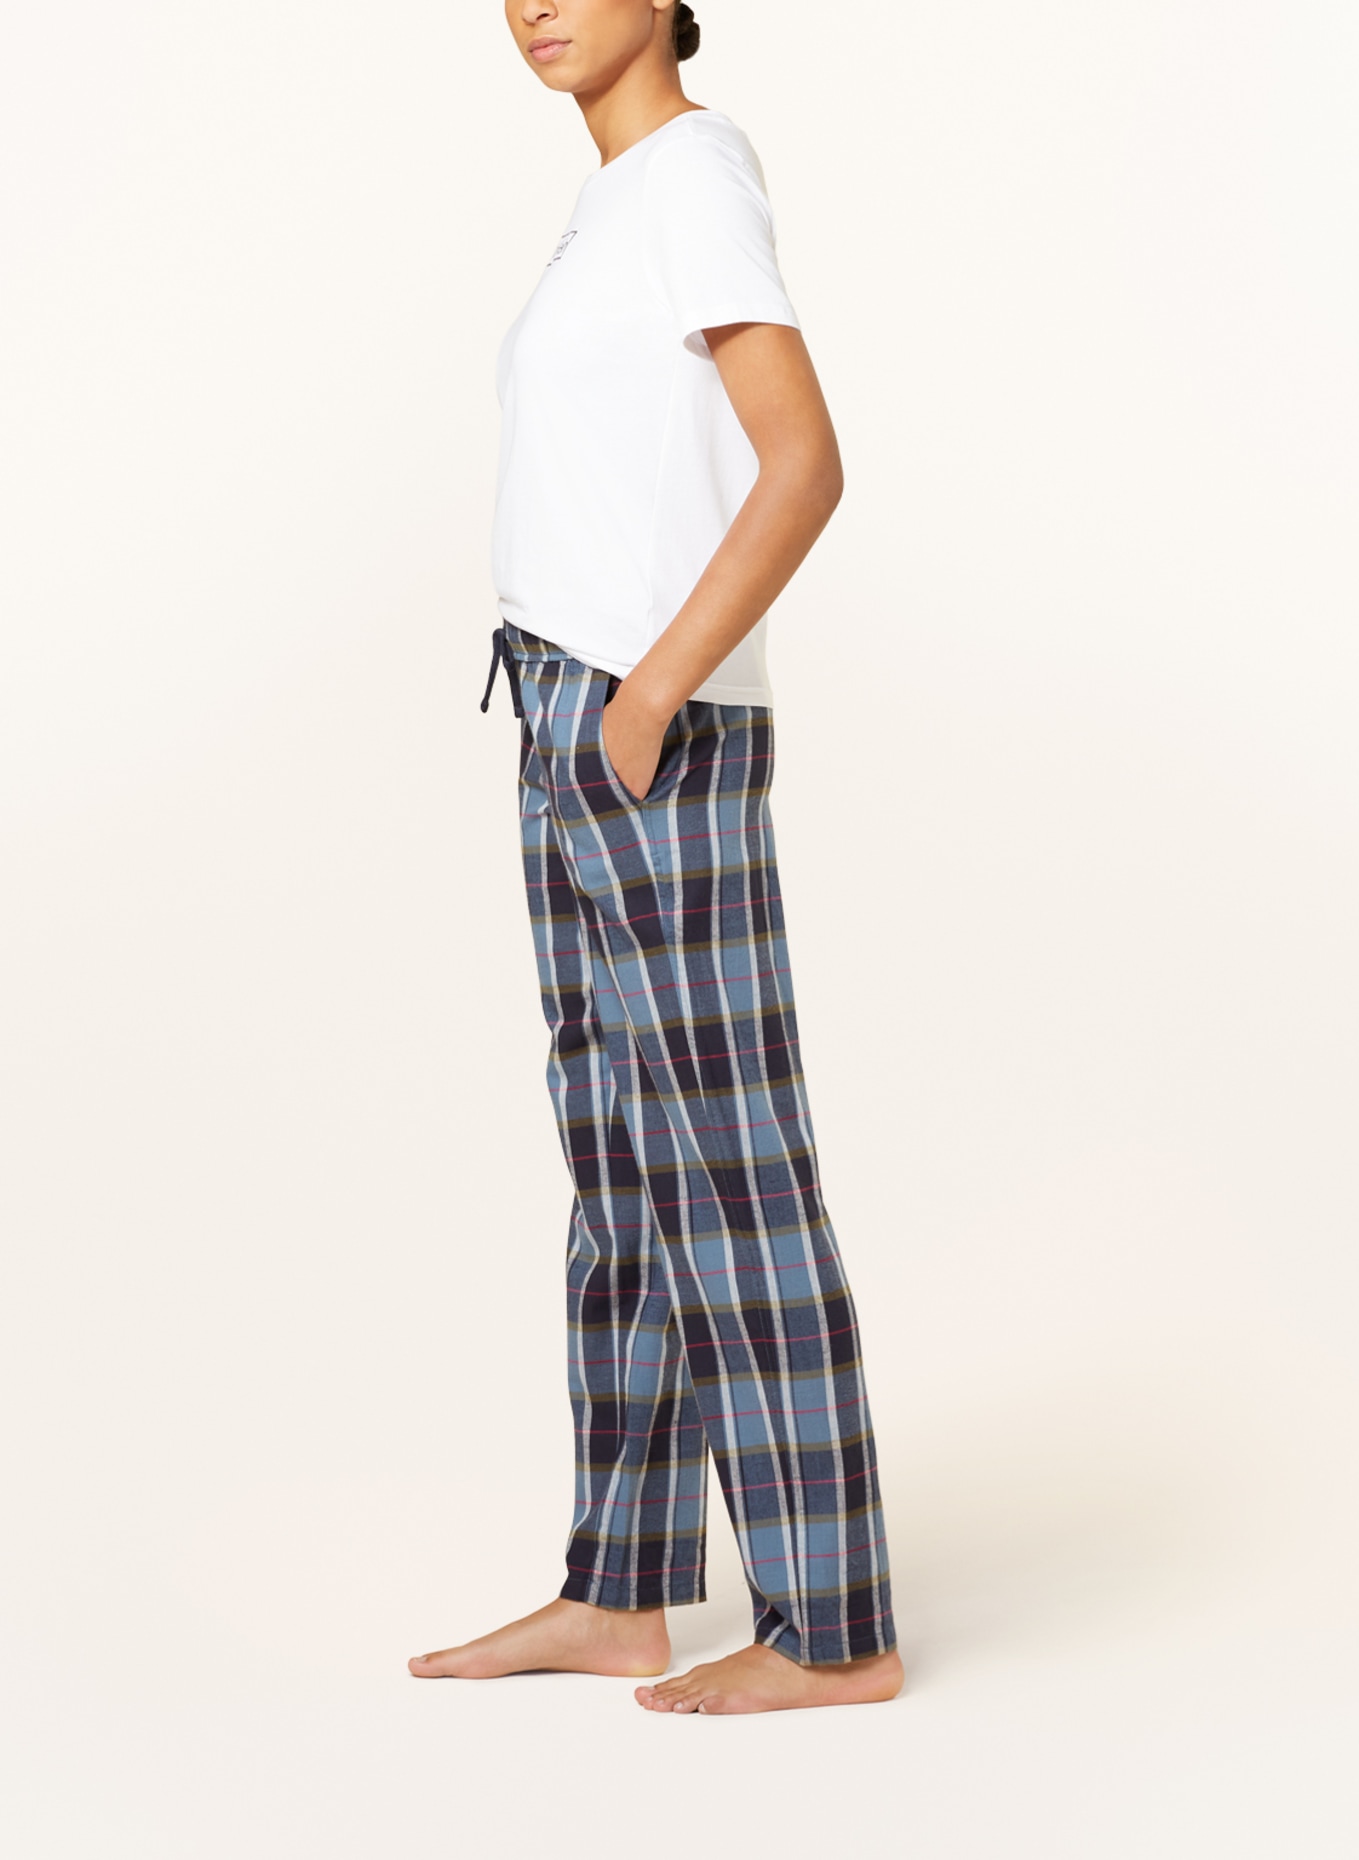 SCHIESSER Pajama pants MIX+RELAX in flannel, Color: DARK BLUE/ LIGHT BLUE/ WHITE (Image 4)